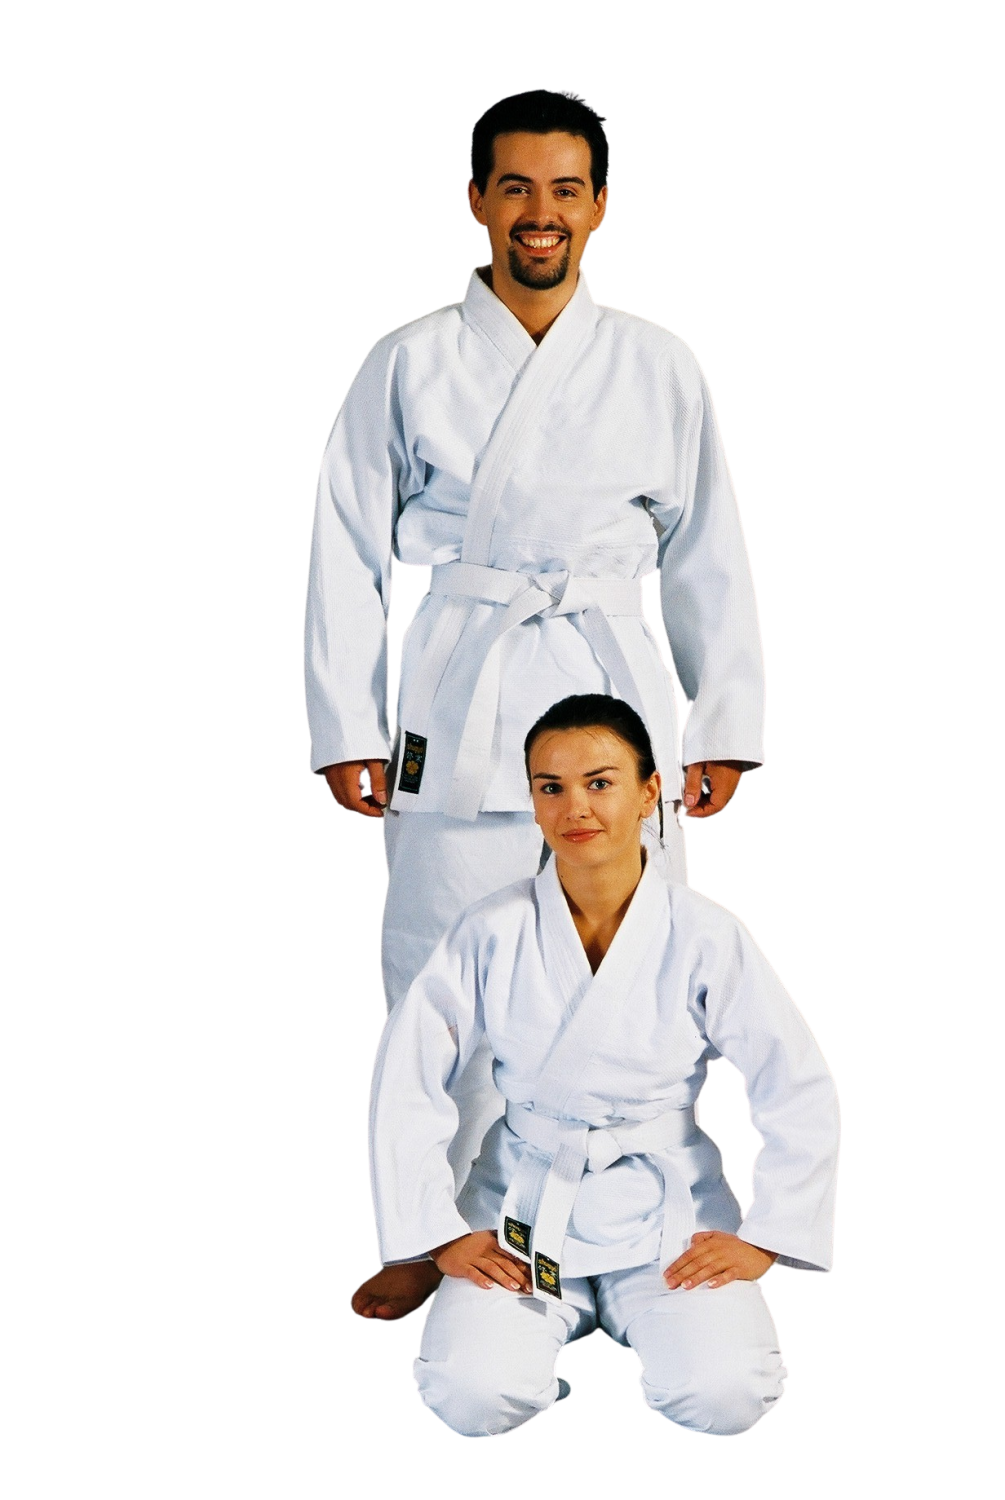 Coquille de protection Karate standard pour homme - Budo-fight